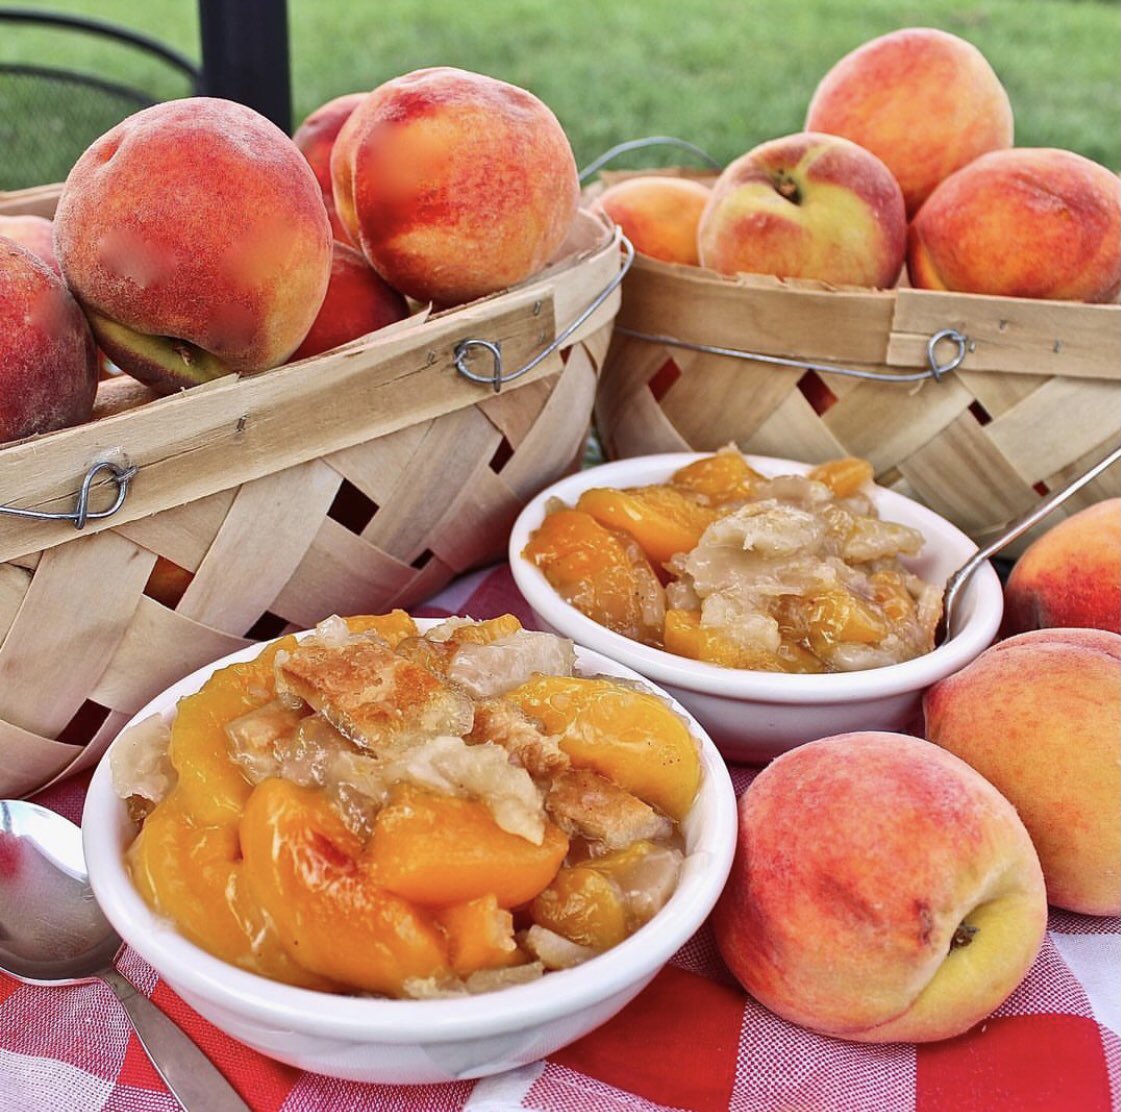 Swing by for a little peach cobbler and pick some up for the 4th! We’re here till 8 o’clock tonight, but closed Tuesday for the holiday. We’re back Wednesday at 11am. Have a safe & Happy 4th, y’all!! 🇺🇸